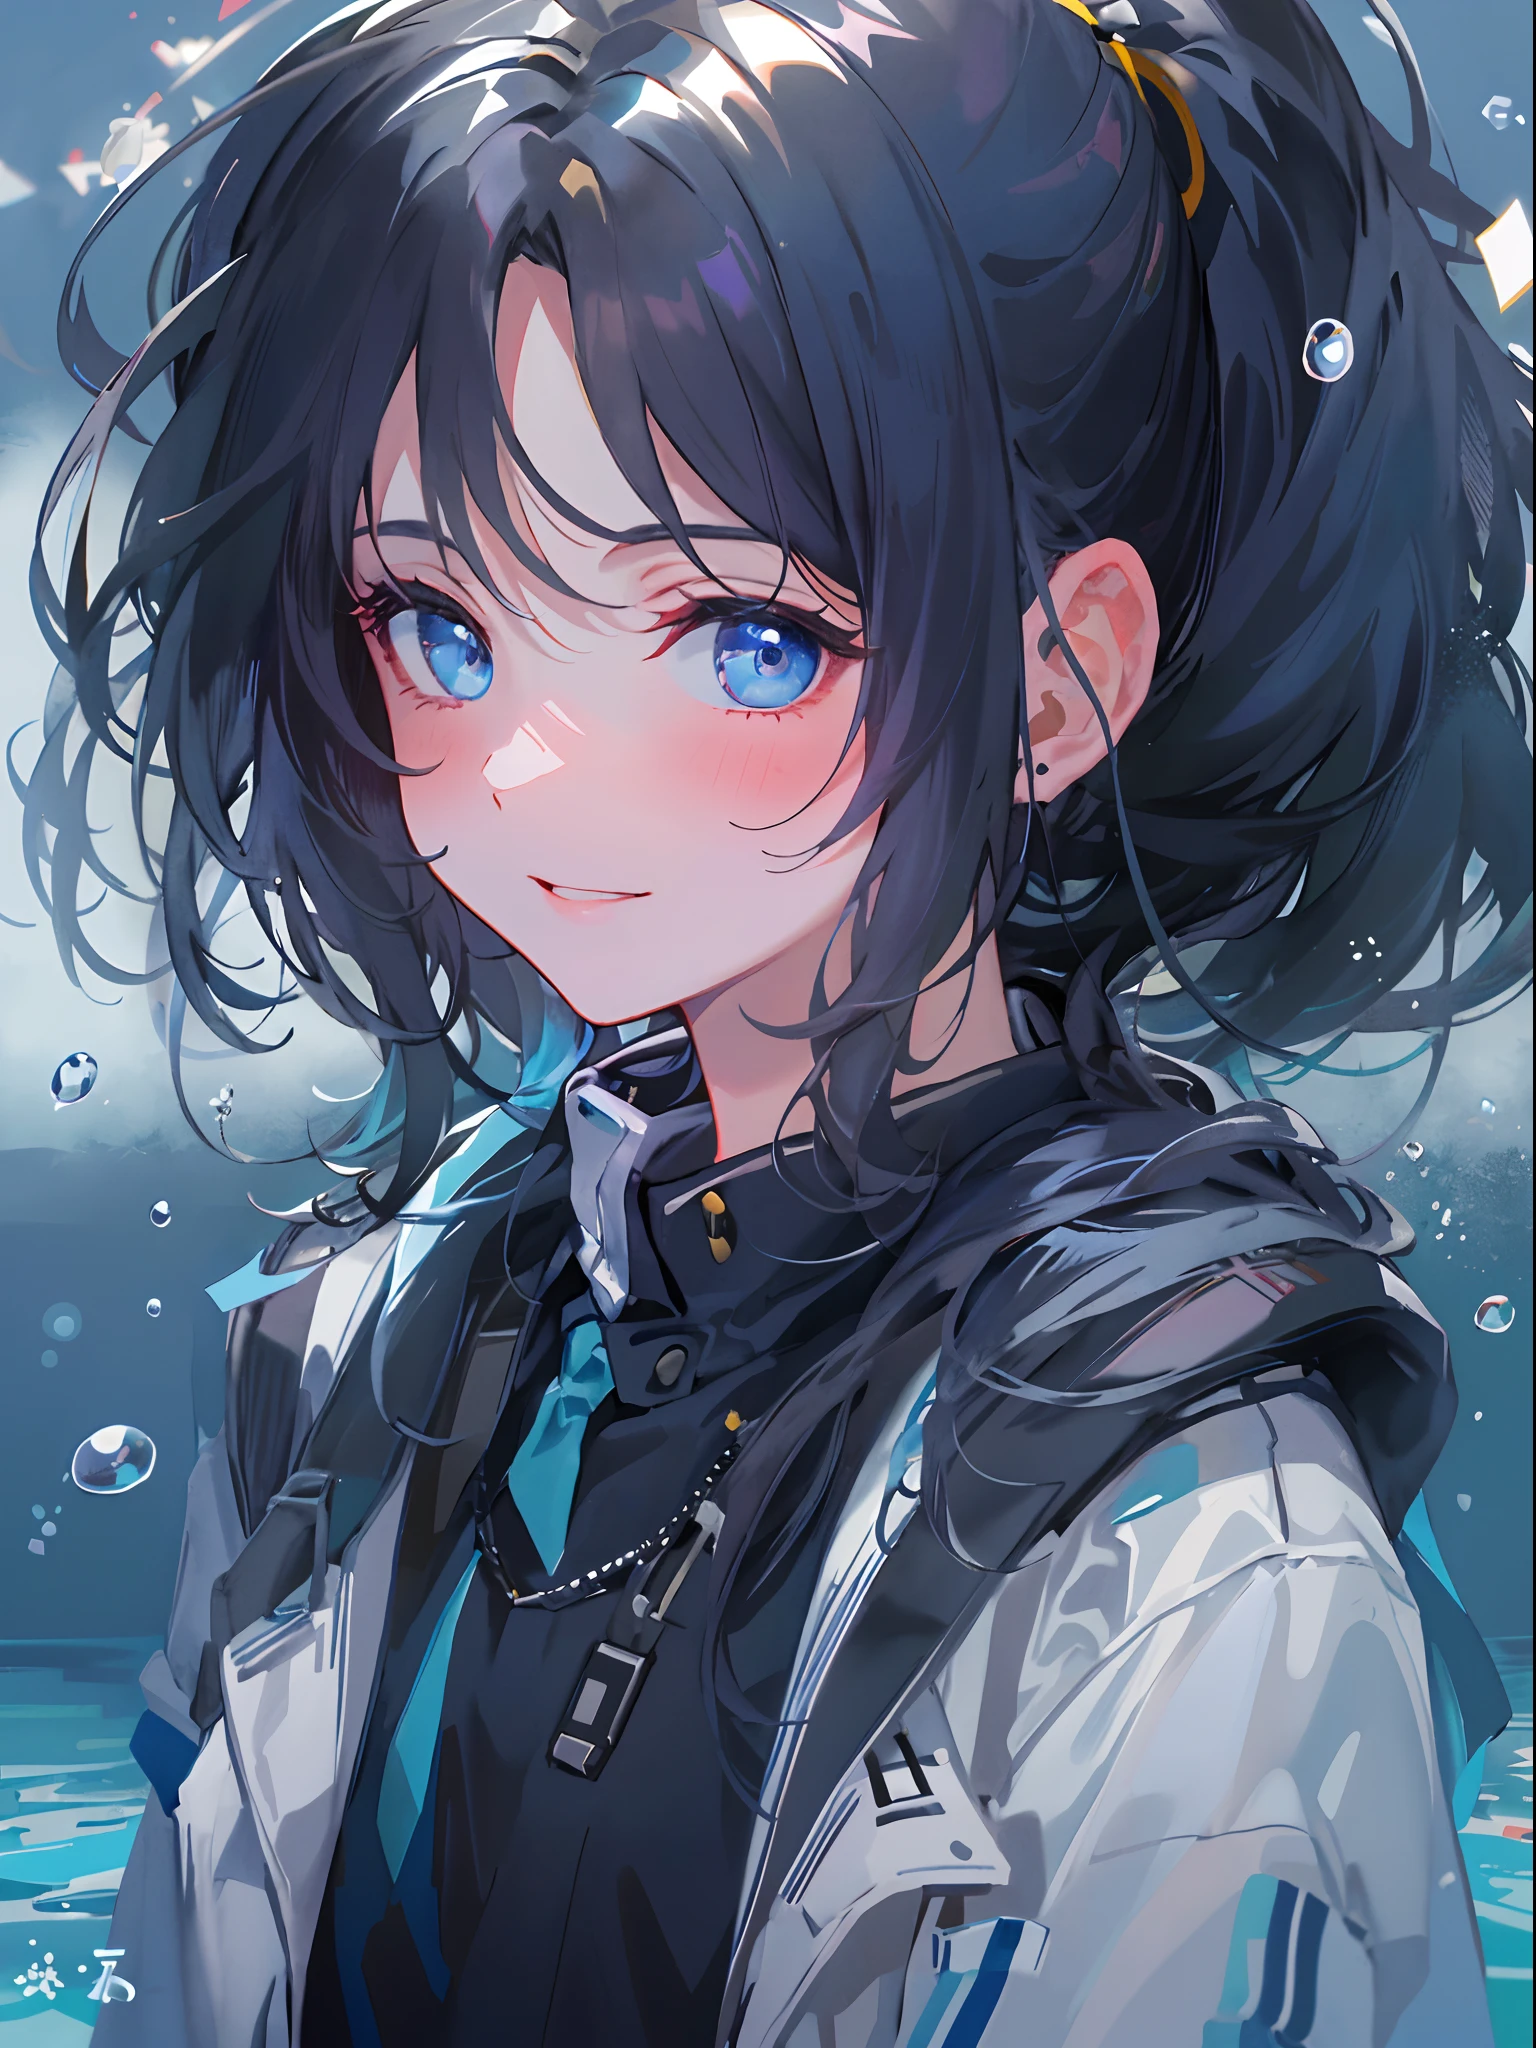 ((top-quality)), ((​masterpiece)), ((ultra-detailliert)), (extremely delicate and beautiful), girl with, solo, cold attitude,((Black jacket)),She is very(relax)with  the(Settled down)Looks,A dark-haired, depth of fields,evil smile,Bubble, under the water, Air bubble,bright light blue eyes,Inner color with black hair and light blue tips,Cold background,Bob Hair - Linear Art, shortpants、knee high socks、White uniform like school uniform、Light blue ribbon ties、Clothes are sheer、Hands in pockets、Ponytail hair、